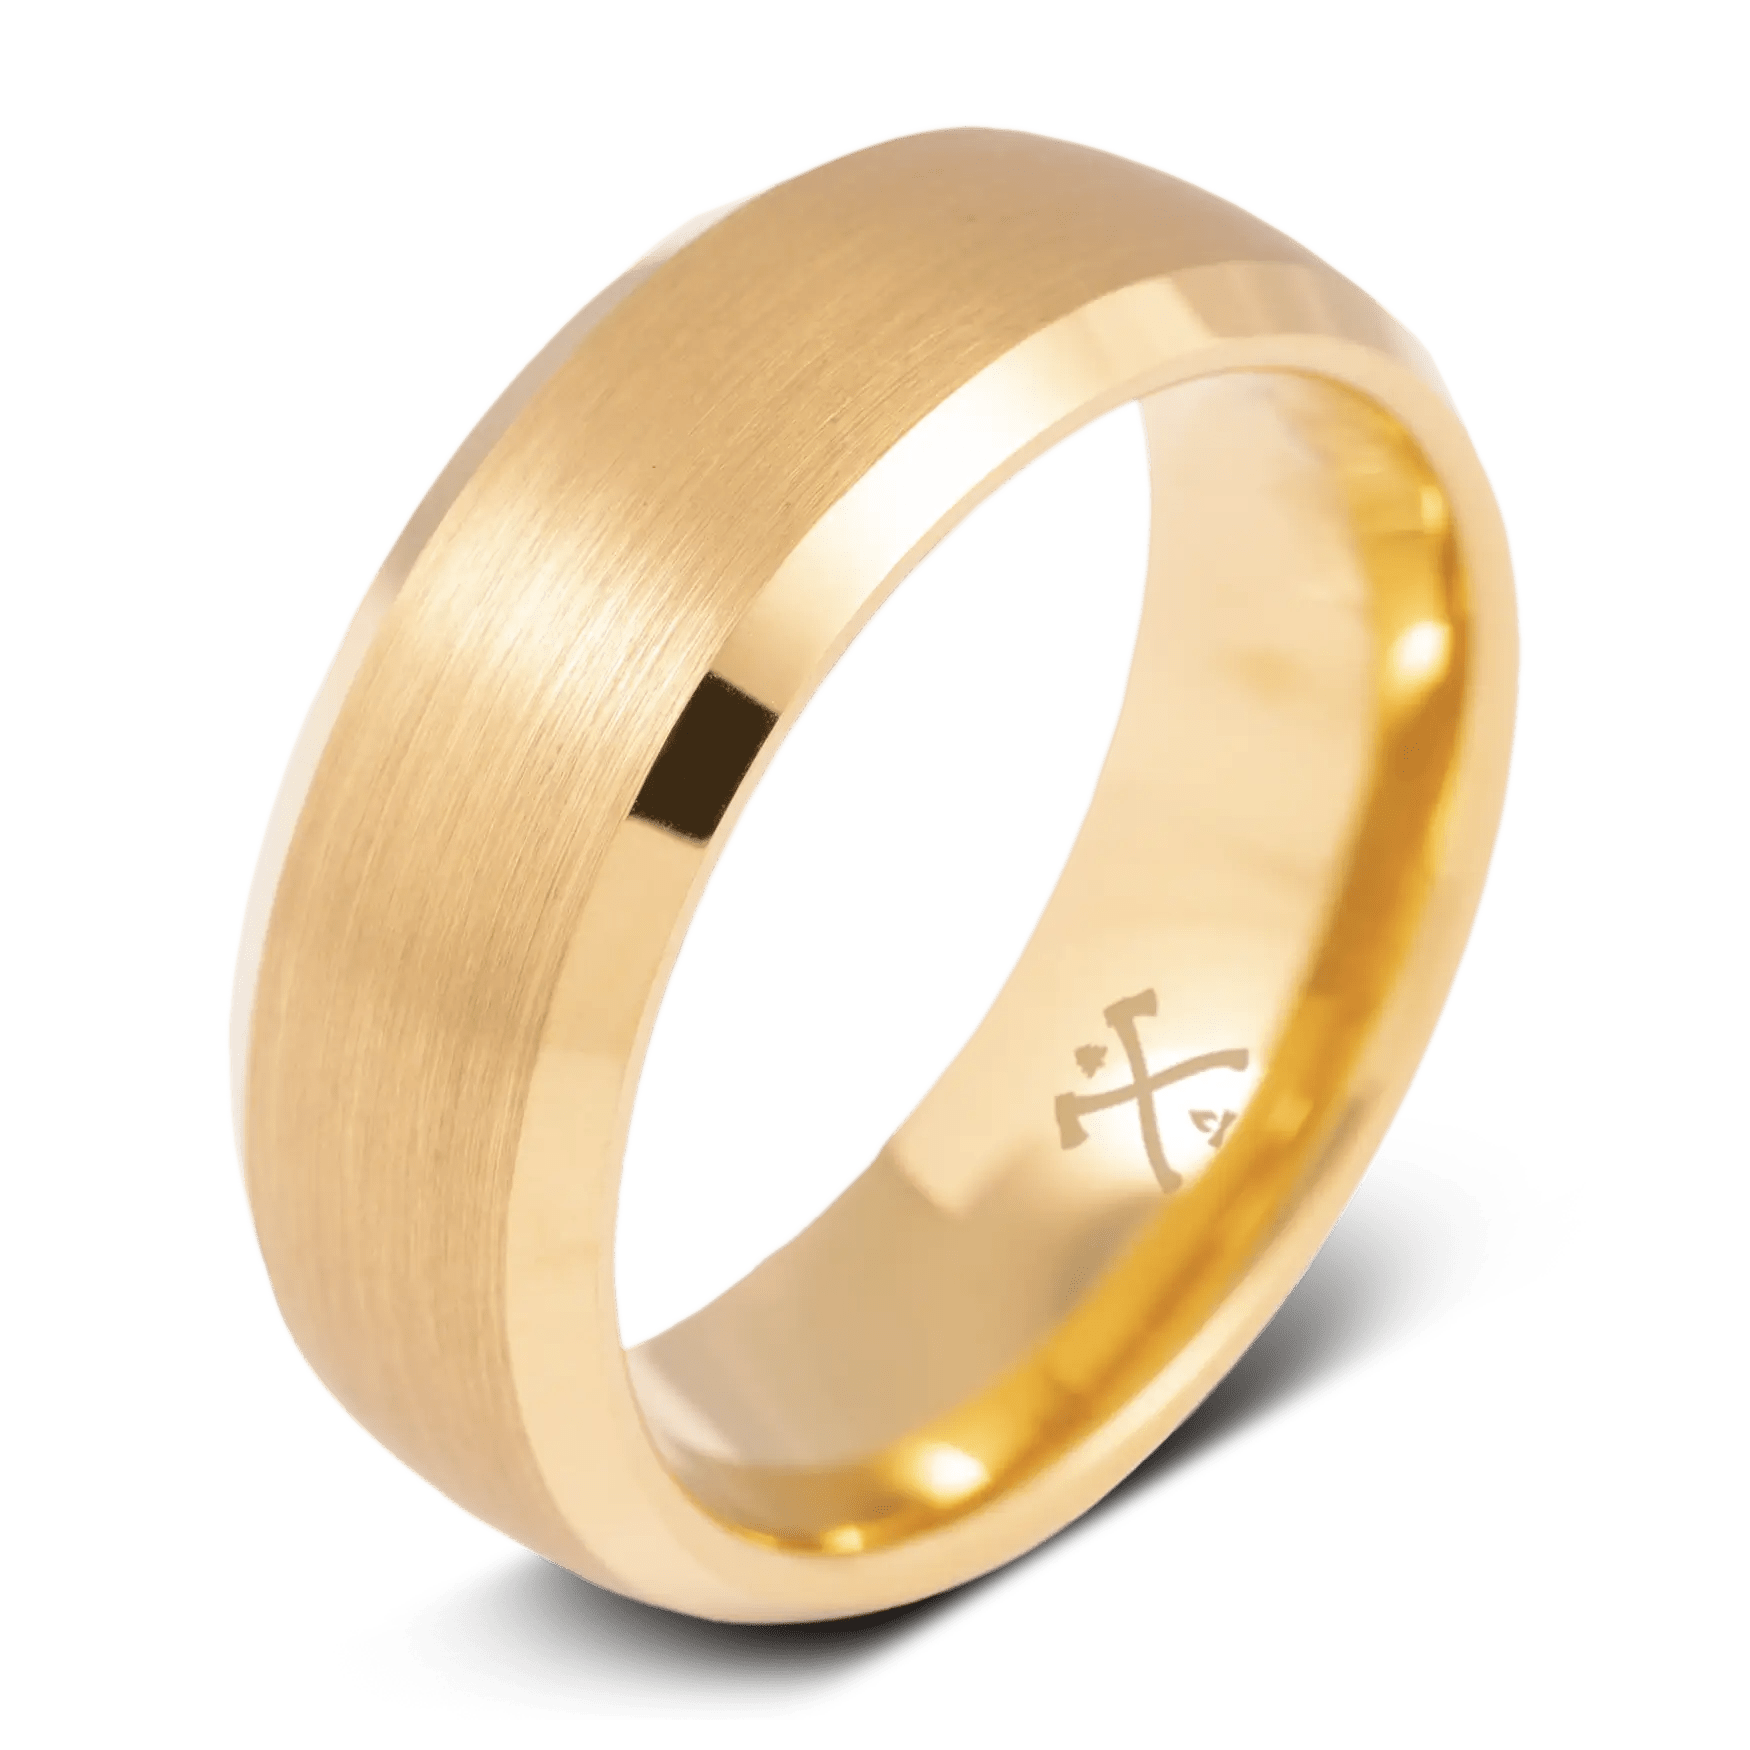 11 Ethical Men's Wedding Bands From Sustainable Brands - The Good